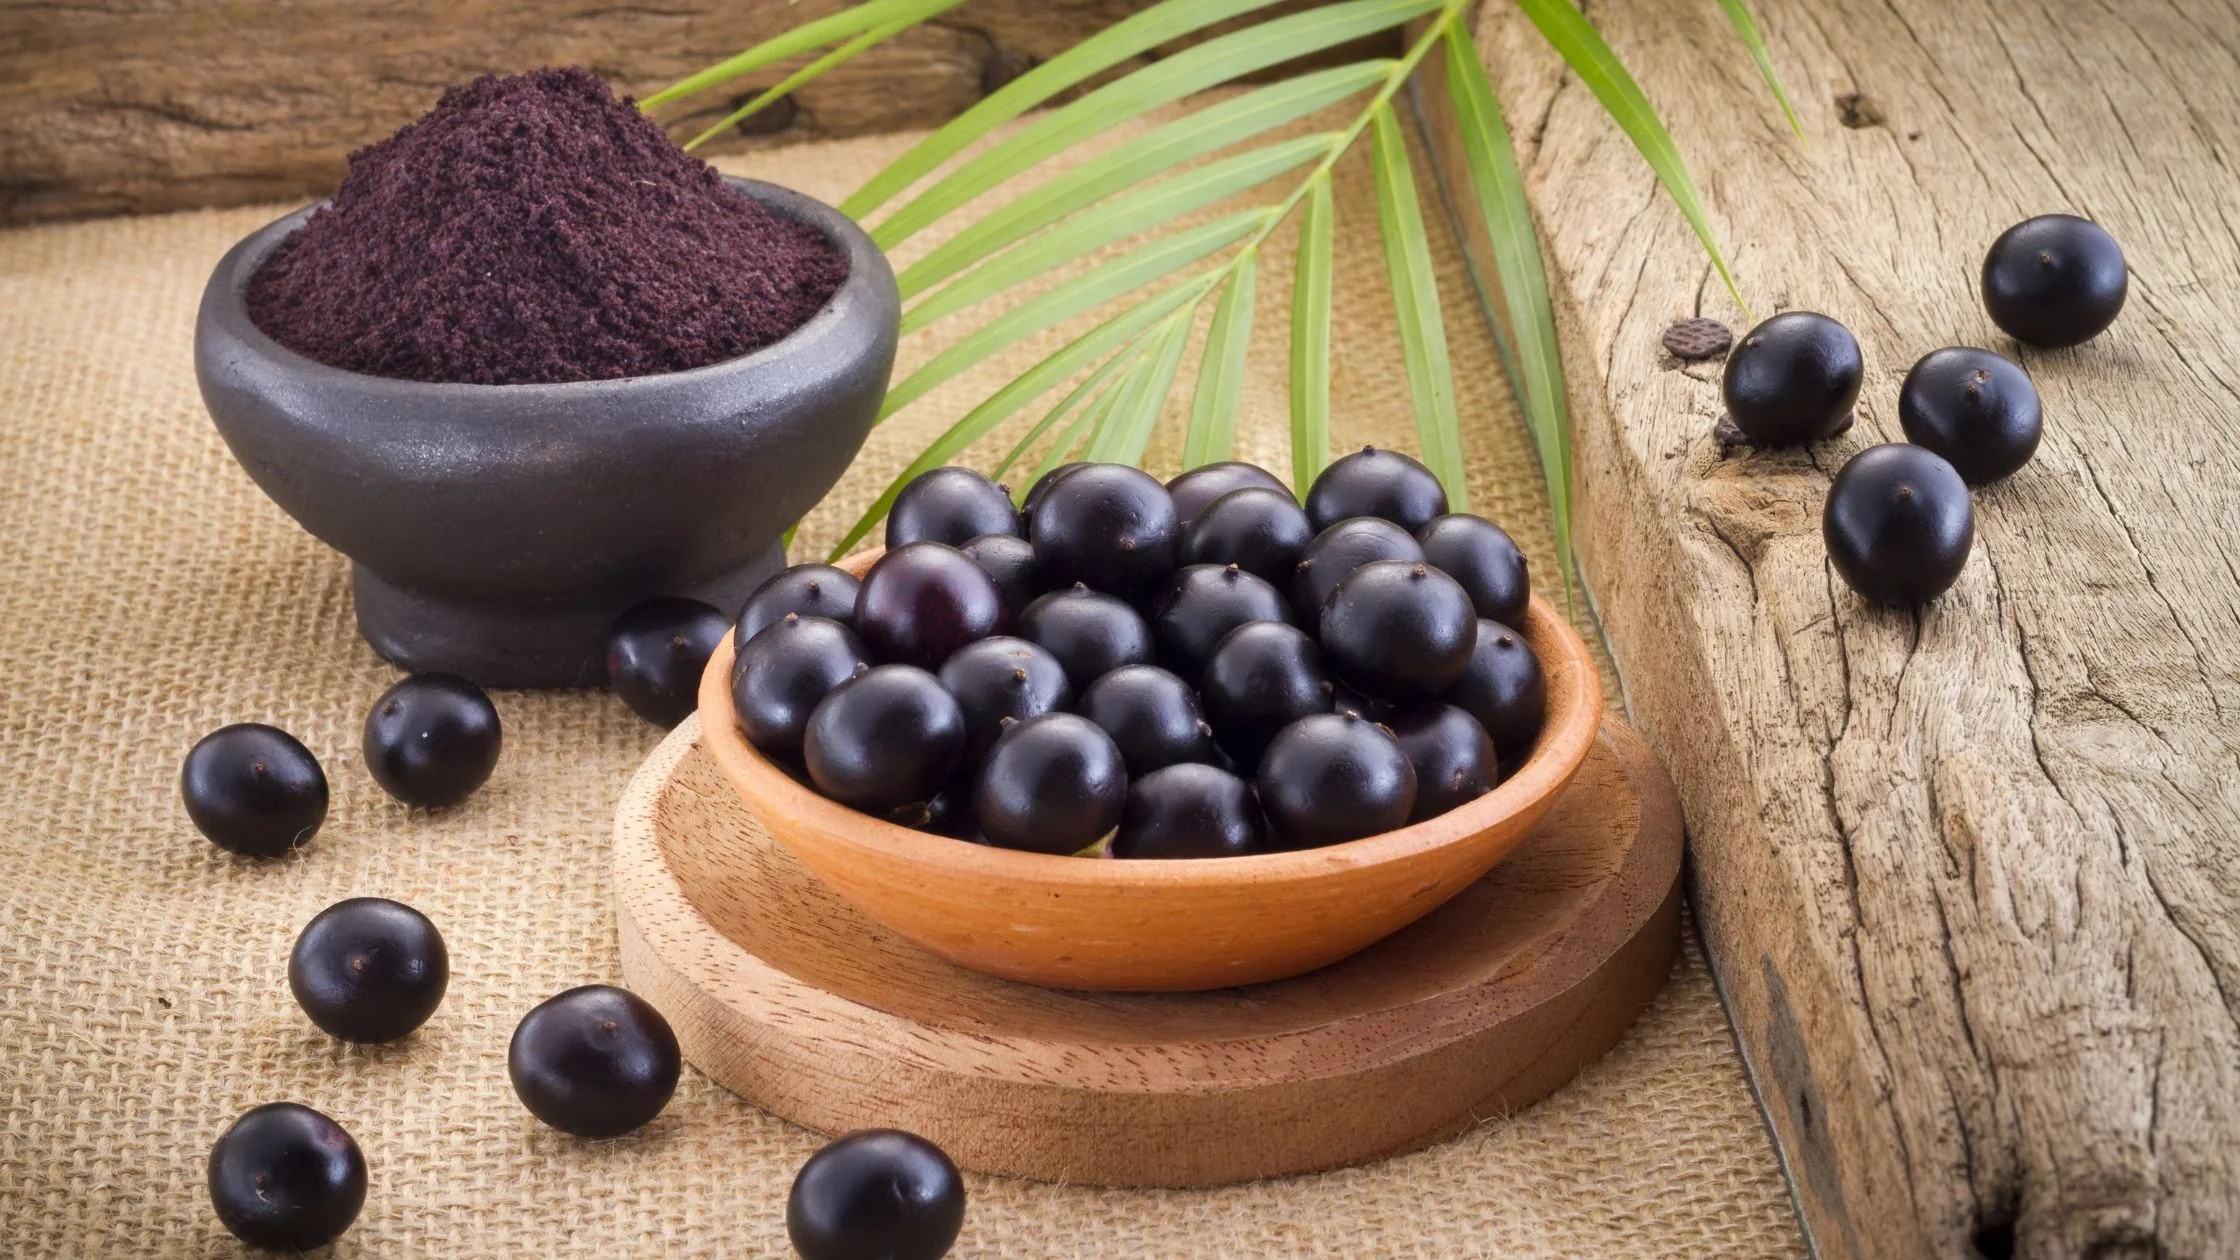 The global Acai Berry Market Growth Accelerated by Increasing Health Consciousness